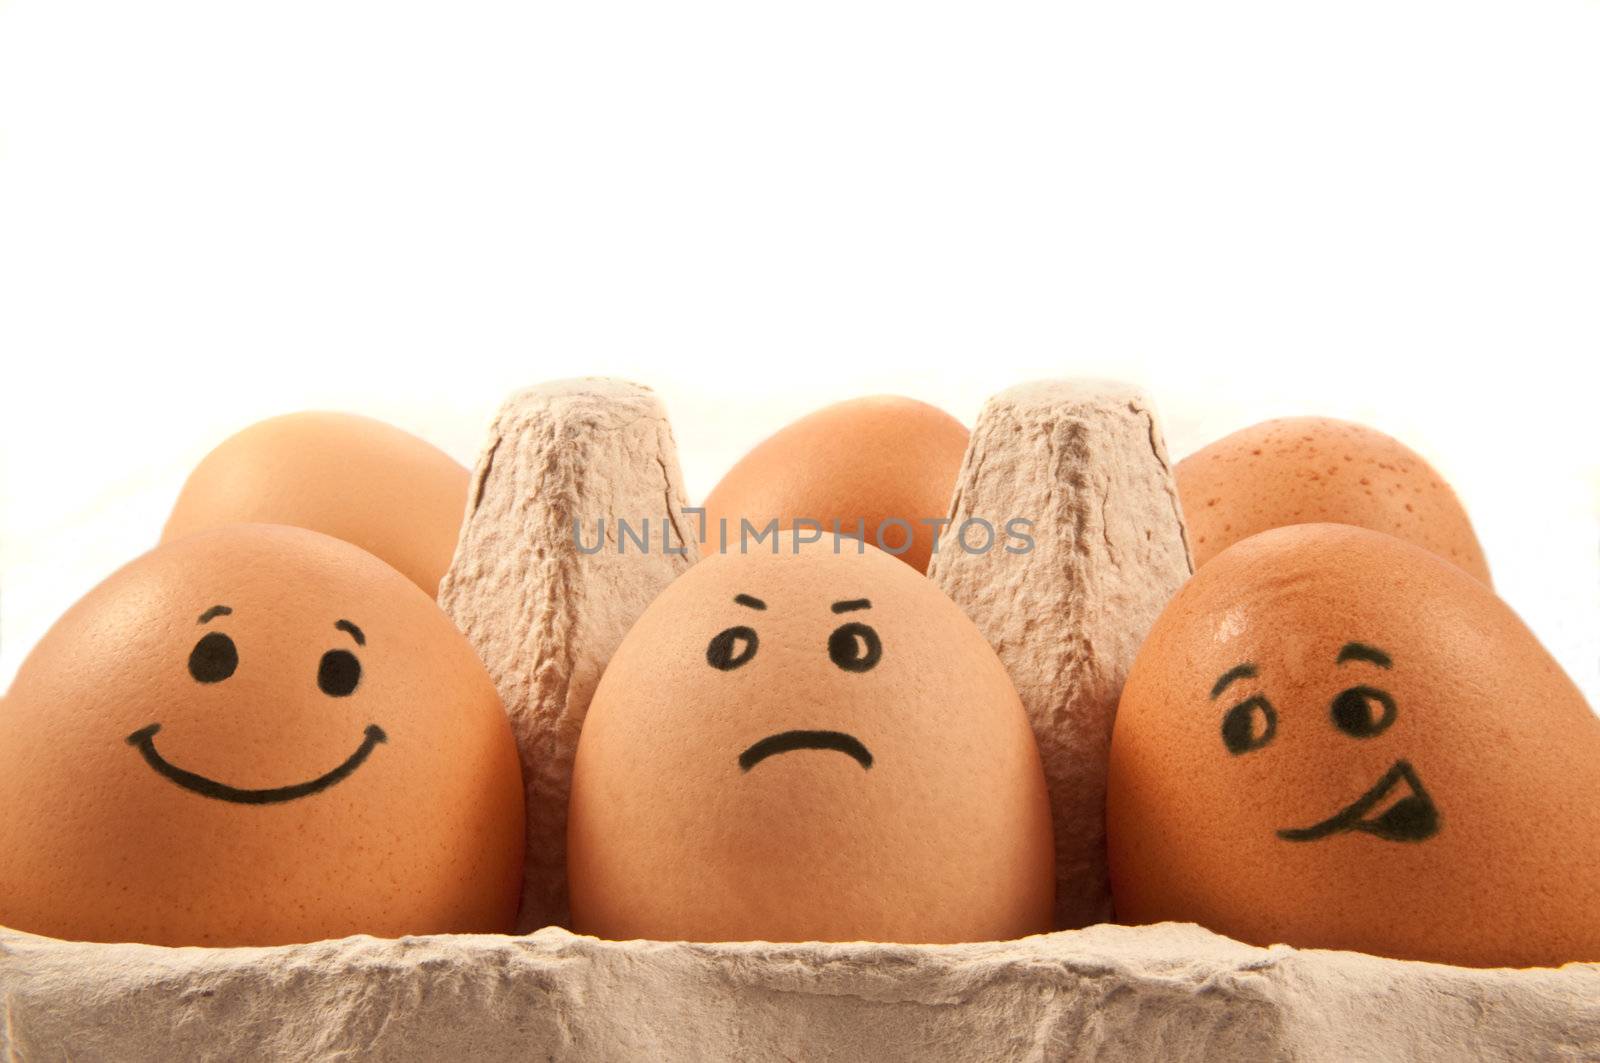 Close and low level capturing a group of brown eggs with painted human faces arranged in a cardboard carton with white background.